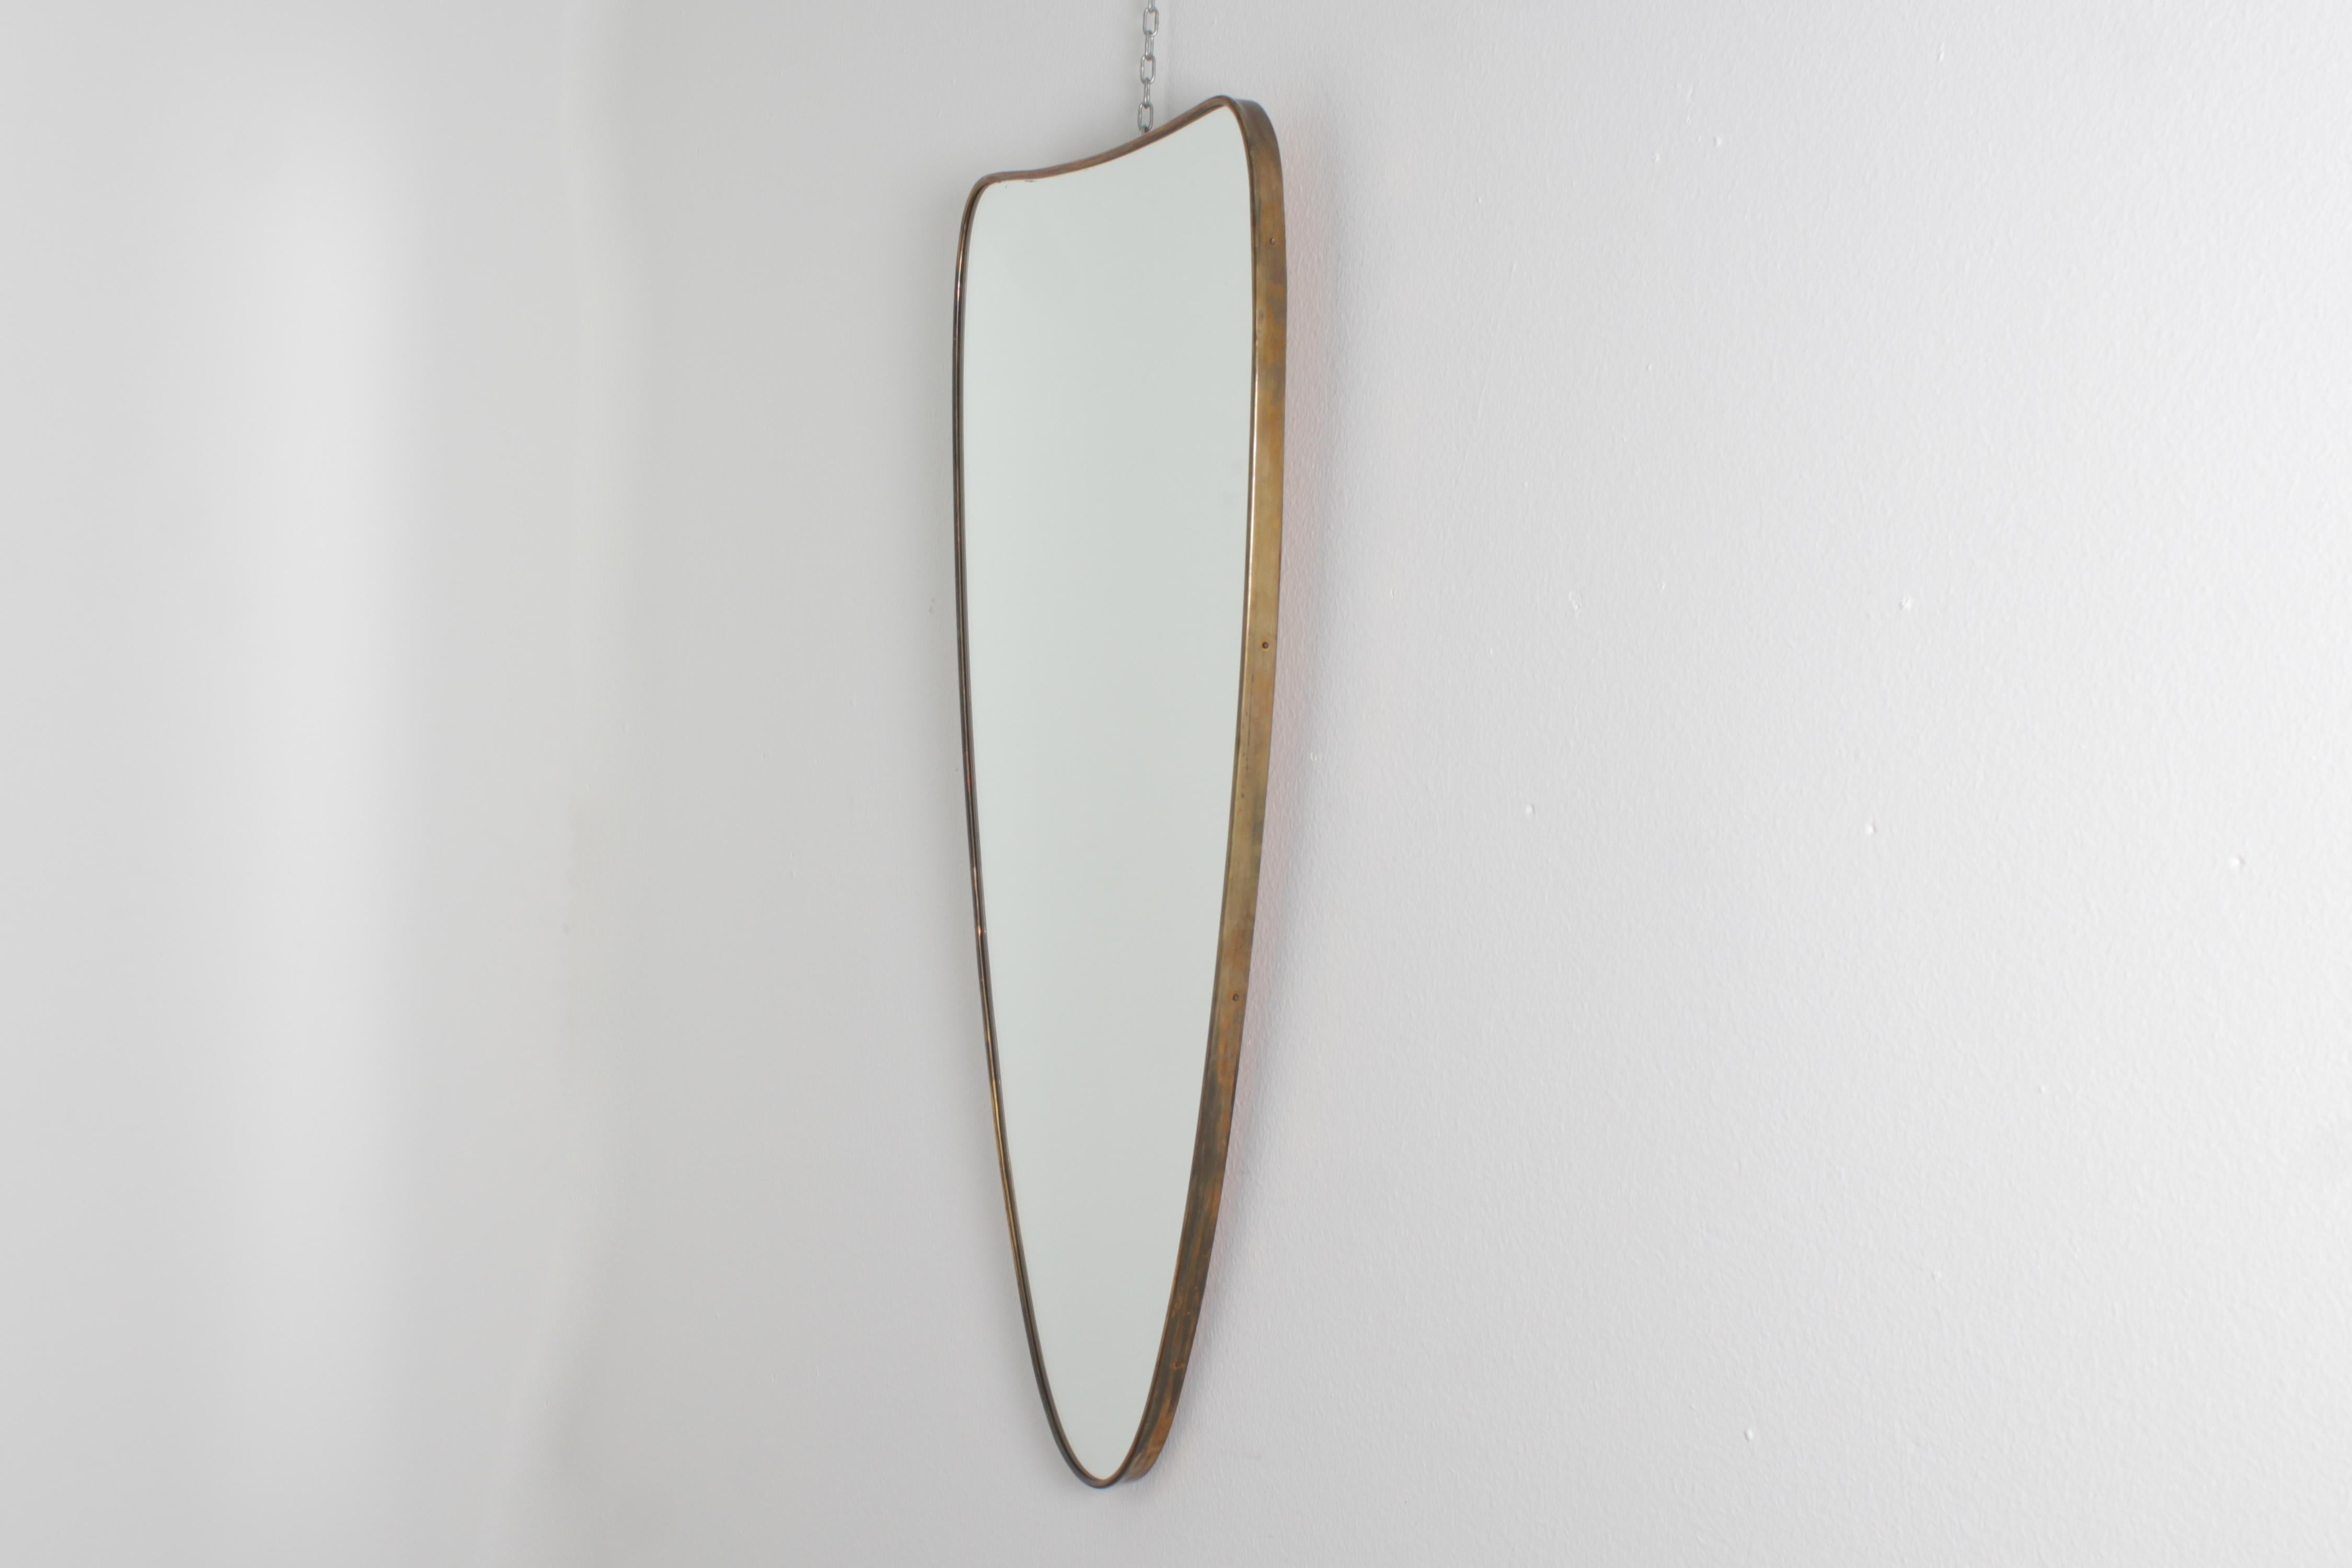 Mid-20th Century Mid-Century G. Ponti Style Shield-Shaped Wall Mirror with Brass Frame 50s Italy For Sale